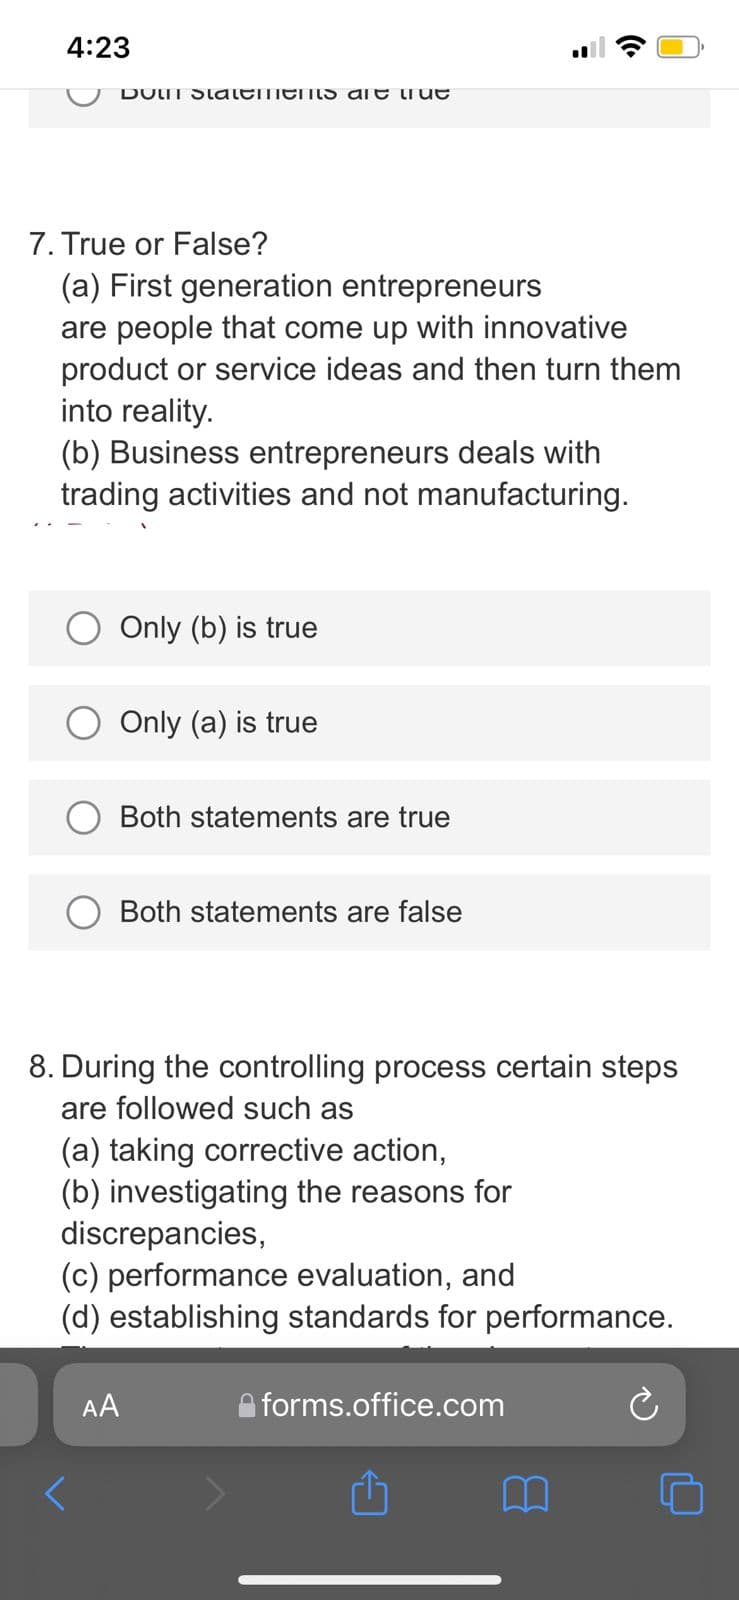 4:23
DOIT StalemenS are tiue
7. True or False?
(a) First generation entrepreneurs
are people that come up with innovative
product or service ideas and then turn them
into reality.
(b) Business entrepreneurs deals with
trading activities and not manufacturing.
Only (b) is true
Only (a) is true
Both statements are true
Both statements are false
8. During the controlling process certain steps
are followed such as
(a) taking corrective action,
(b) investigating the reasons for
discrepancies,
(c) performance evaluation, and
(d) establishing standards for performance.
AA
forms.office.com
